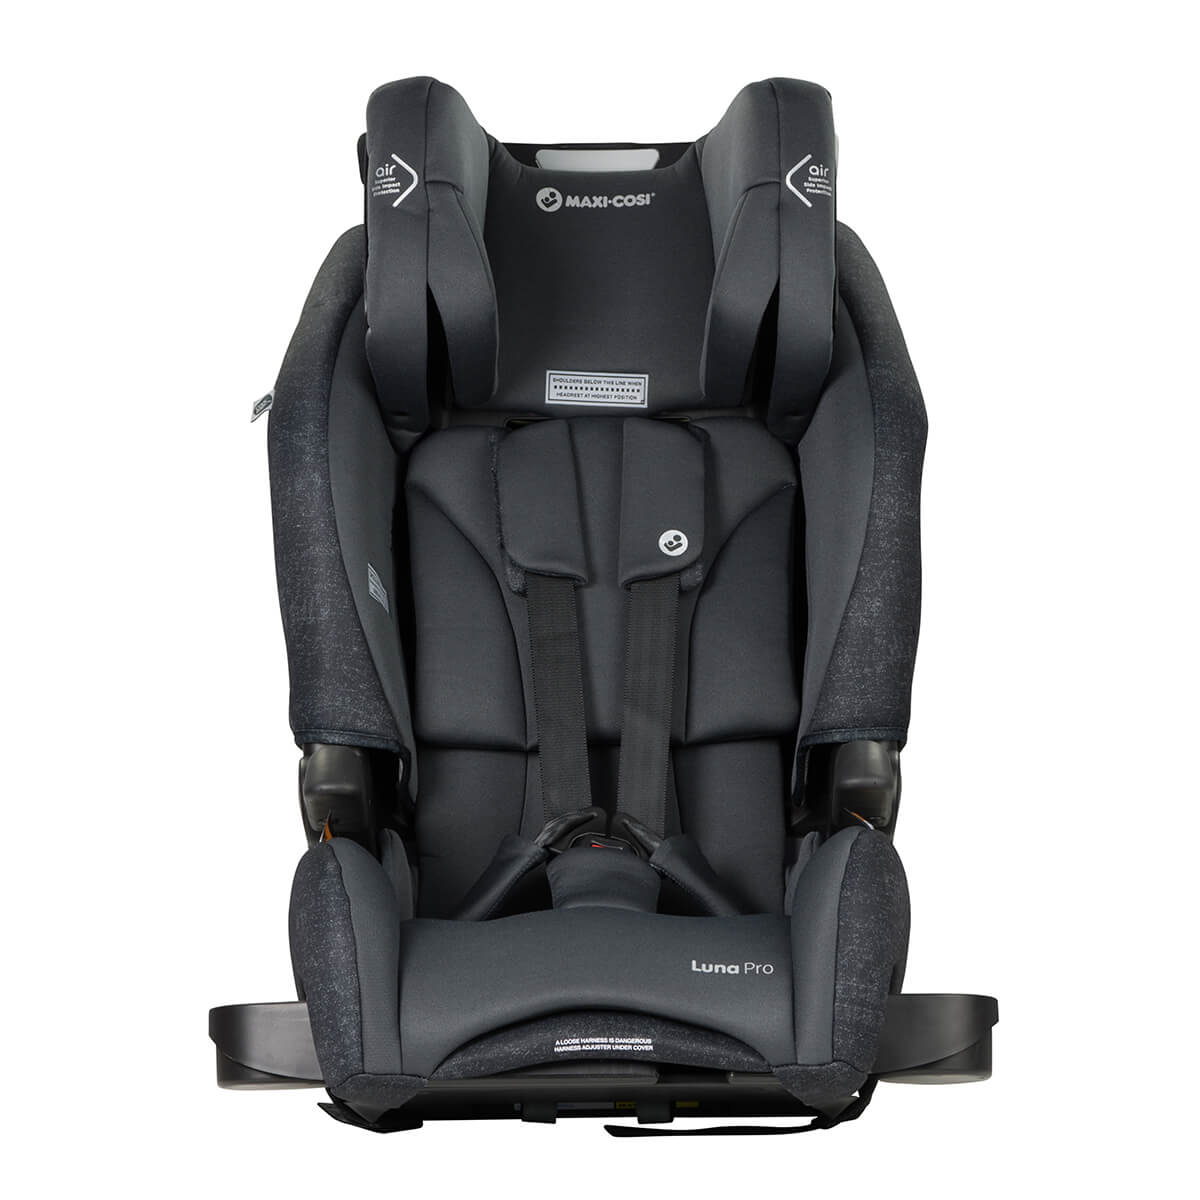 Maxi-Cosi Luna Pro Car Seat with 6 point harness for child safety